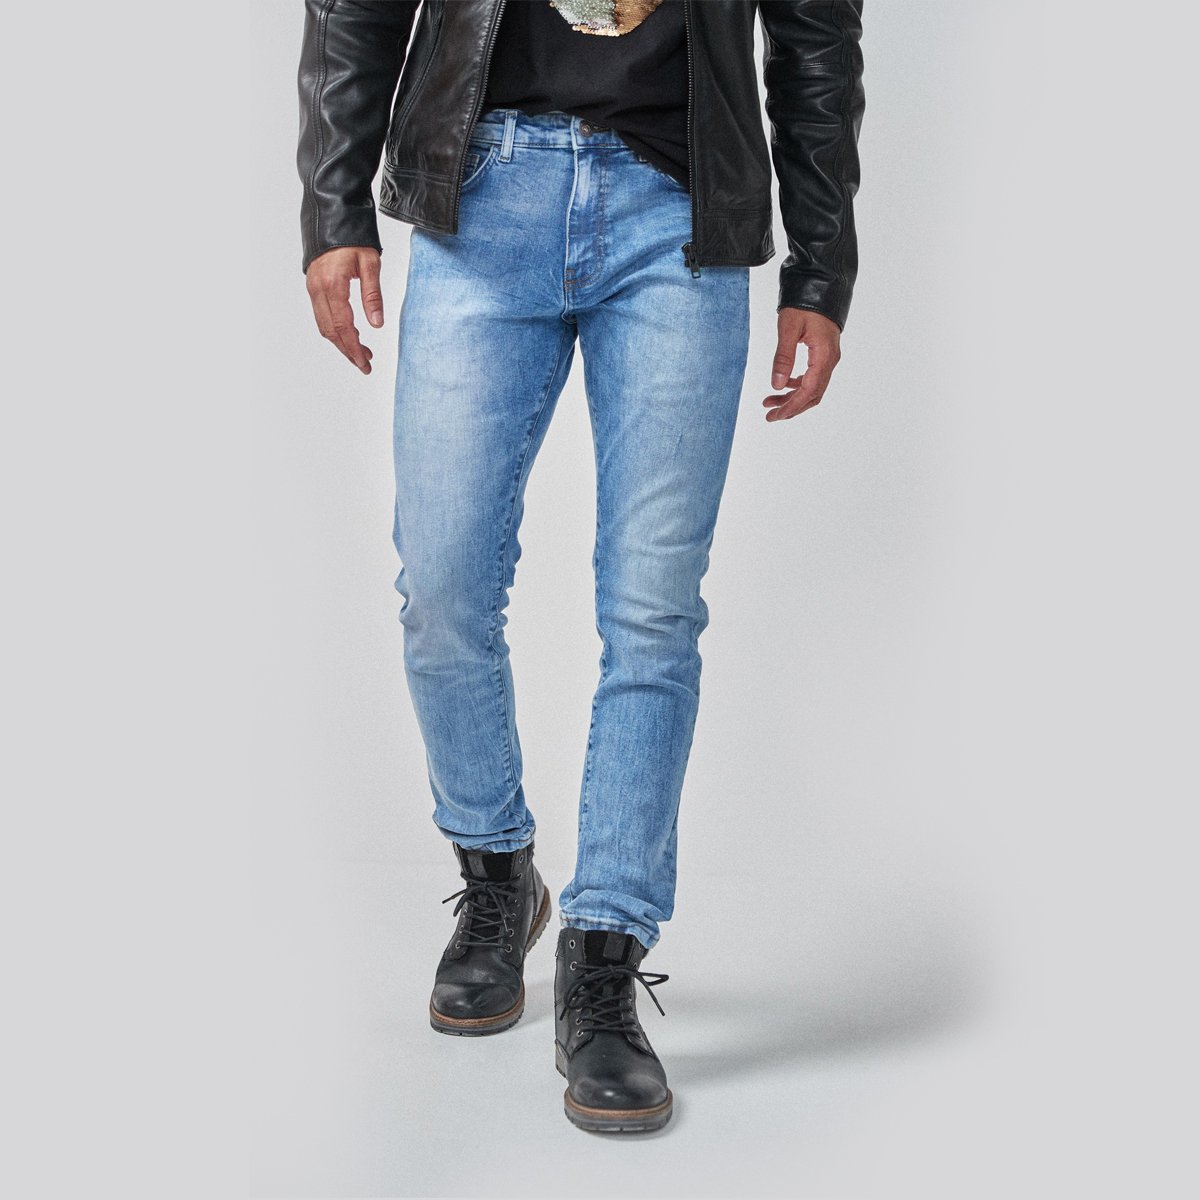 STRETCH & NARROW DENIM PENT MID BLUE WASH : Buy Online At Best Prices ...